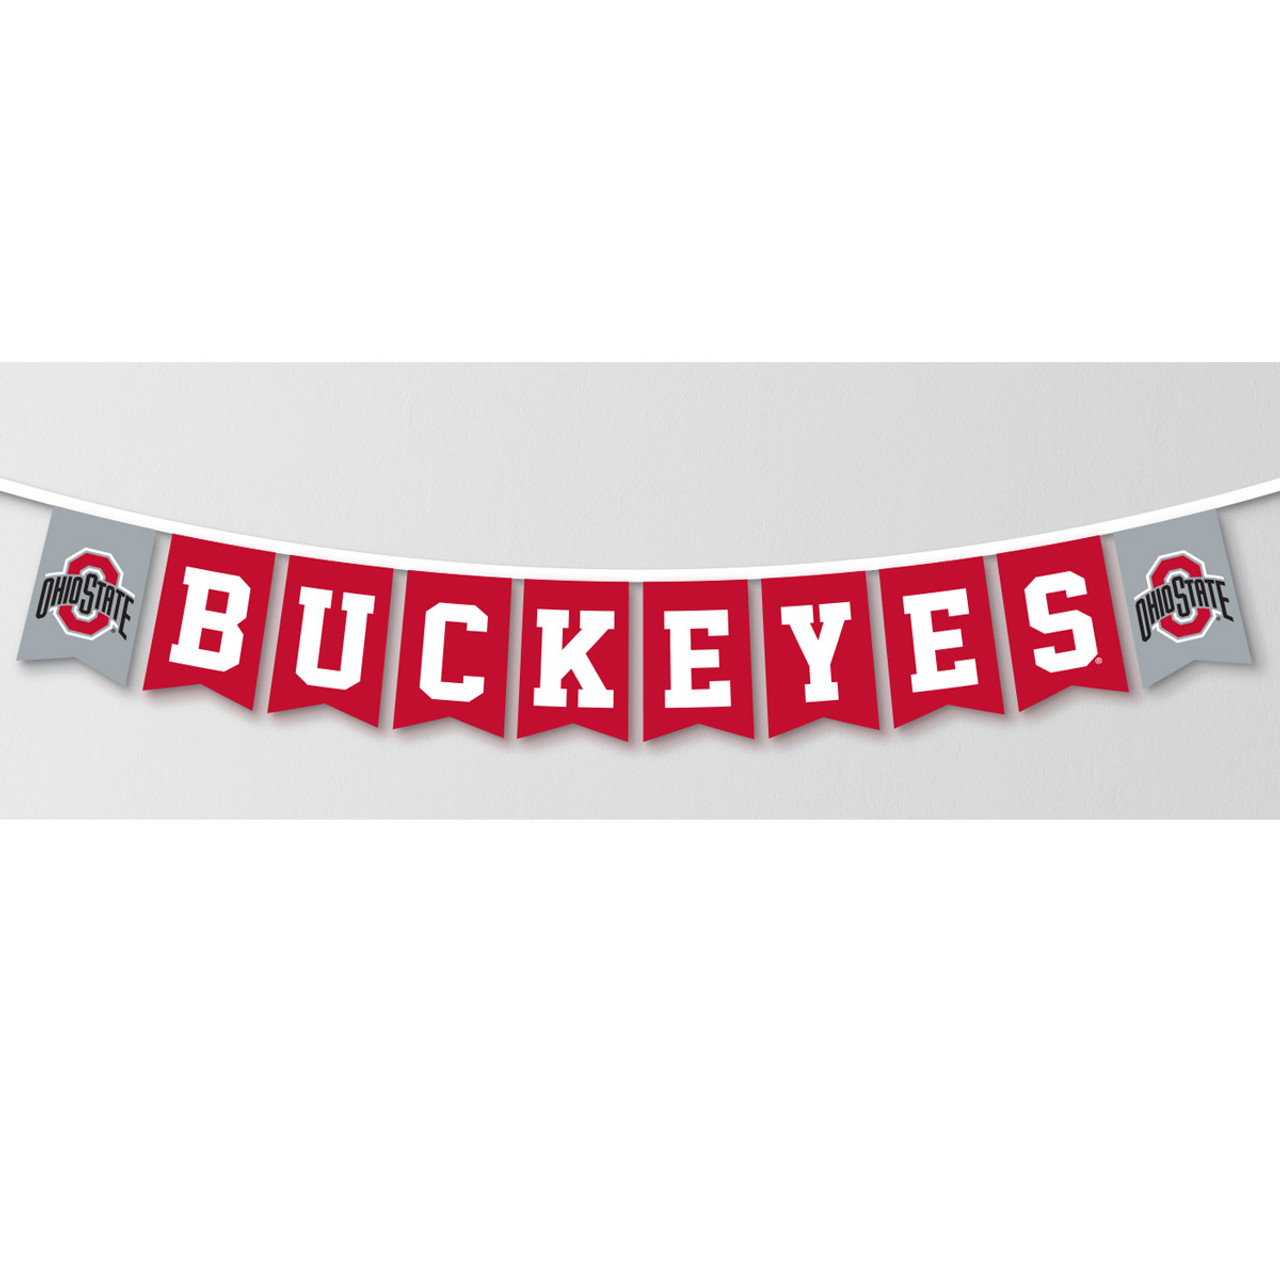 Buckeye String Banner - College Traditions